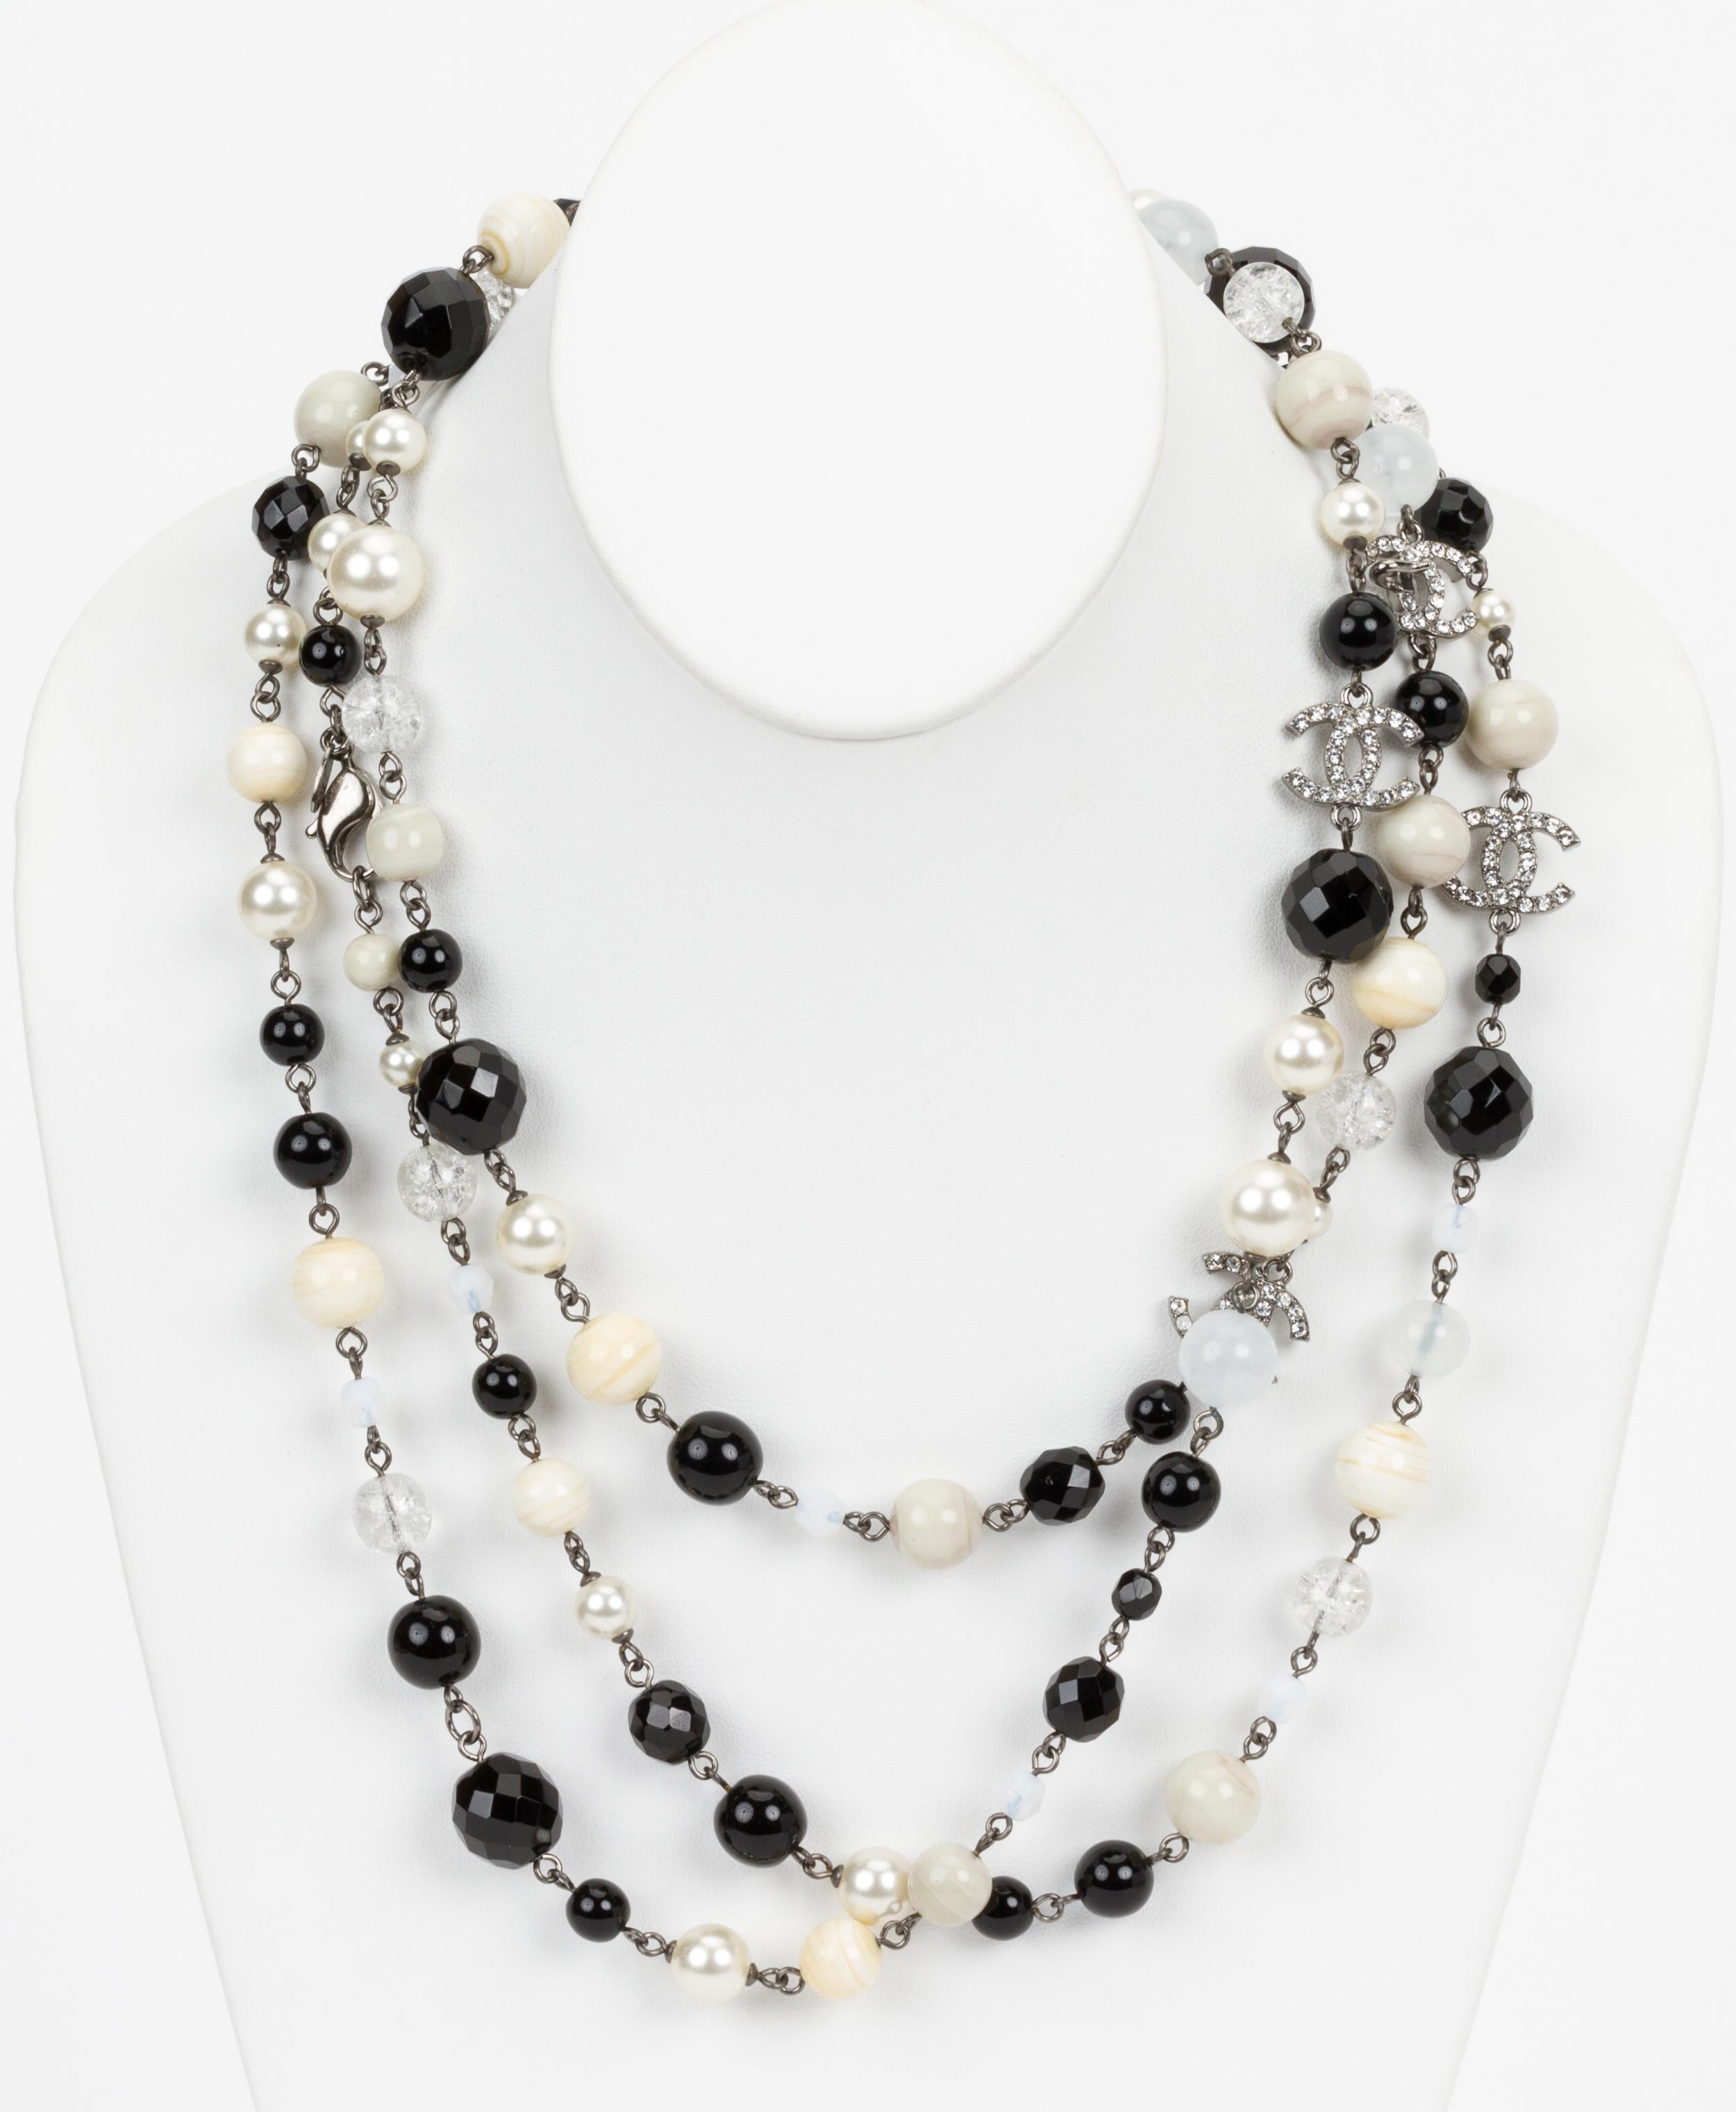 Women's Chanel Classic Black & White Beaded Strand Necklace